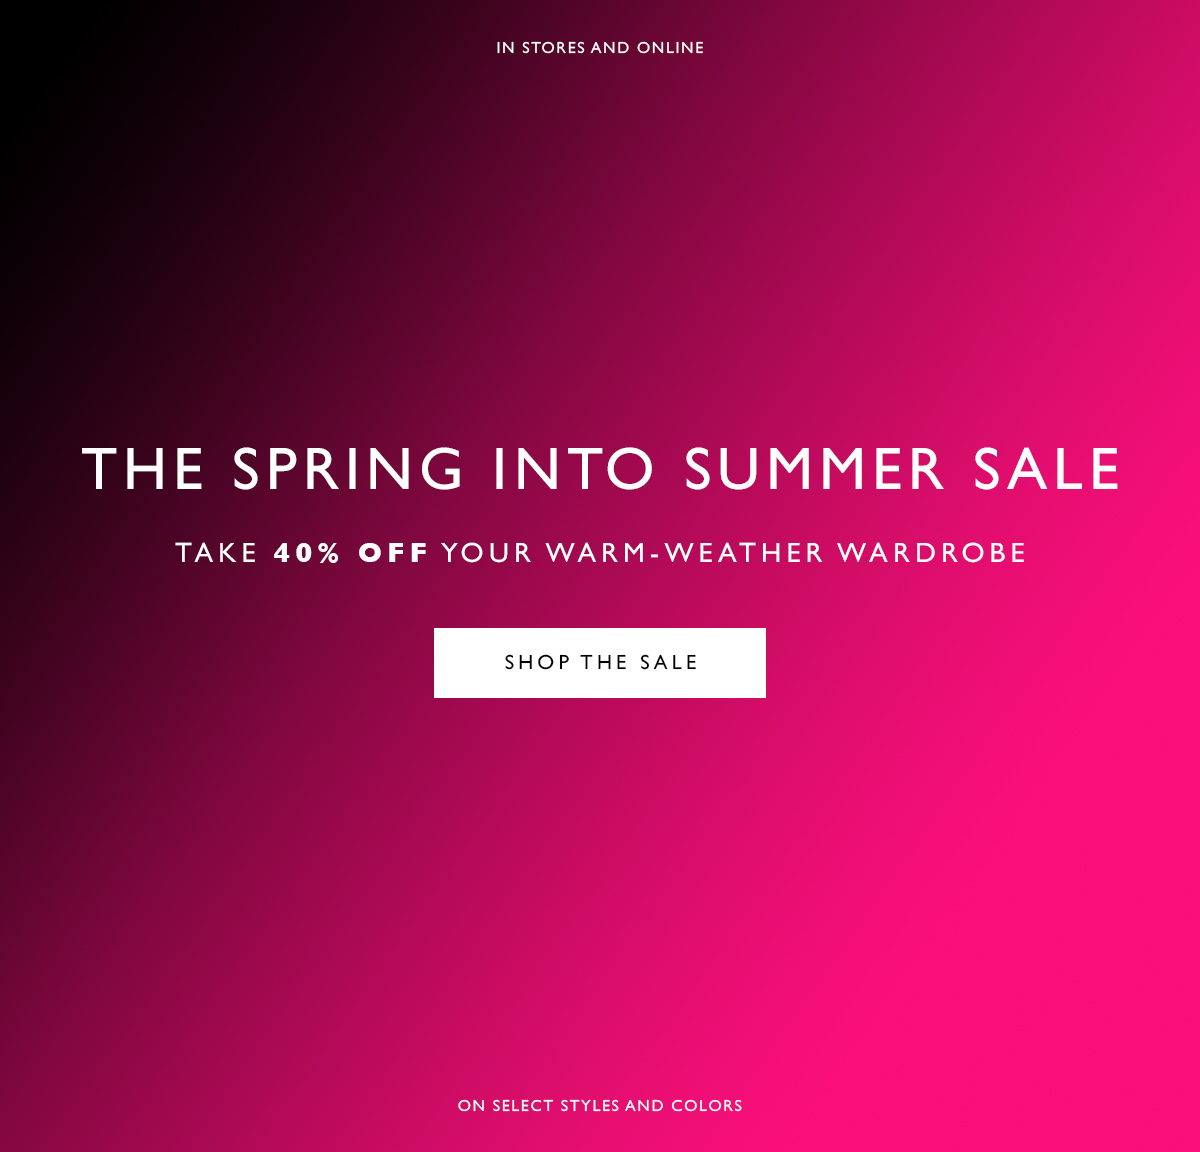 The Spring into Summer Sale. Take 40% off your warm-weather wardrobe. SHOP THE SALE. On select styles and colors